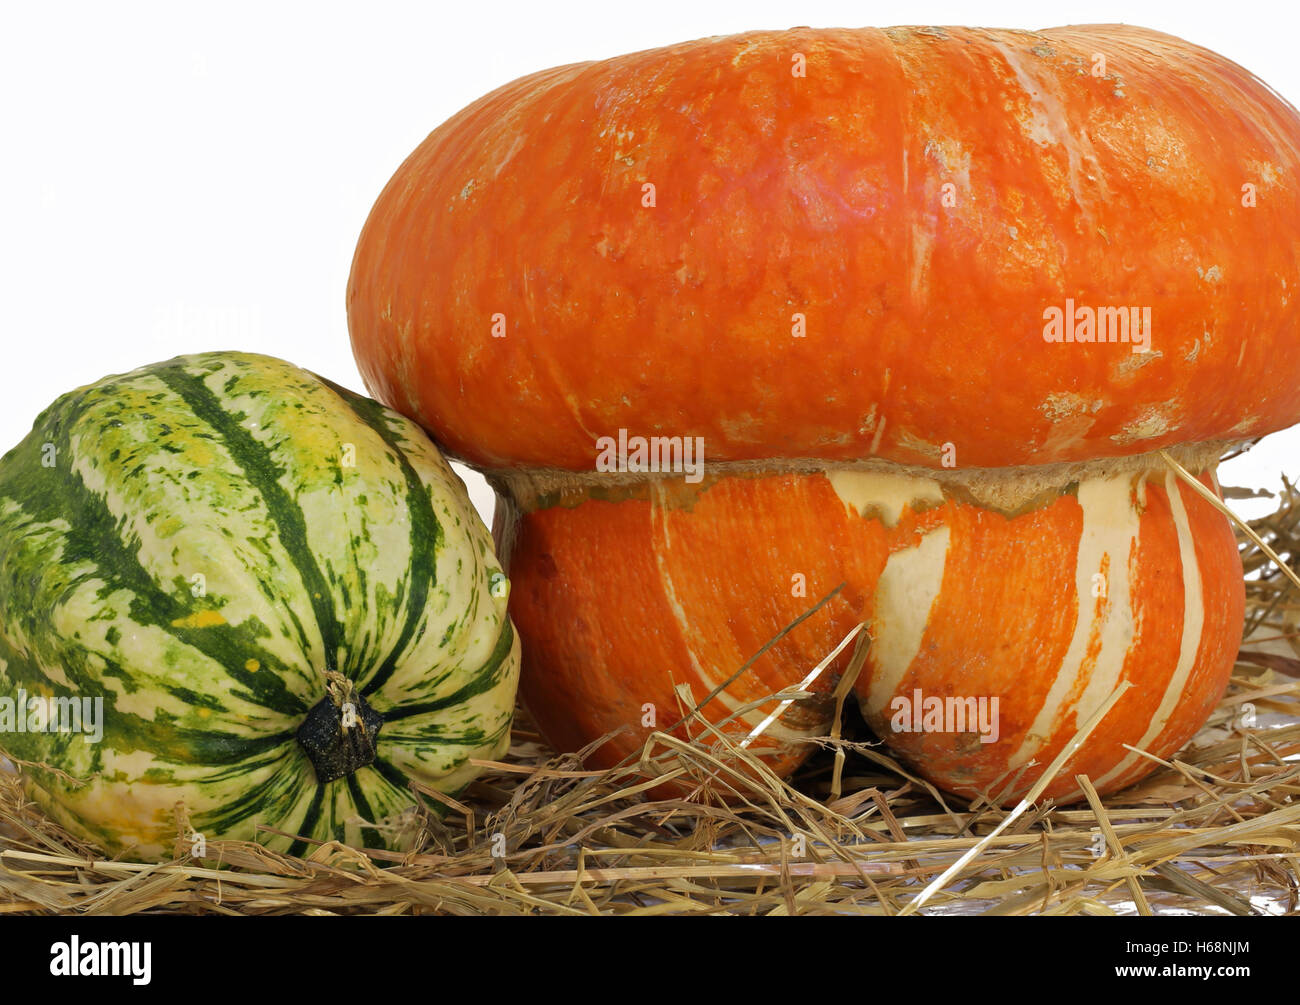 large orange pumpkin for halloween and a green zucchini on the straw in the fall Stock Photo